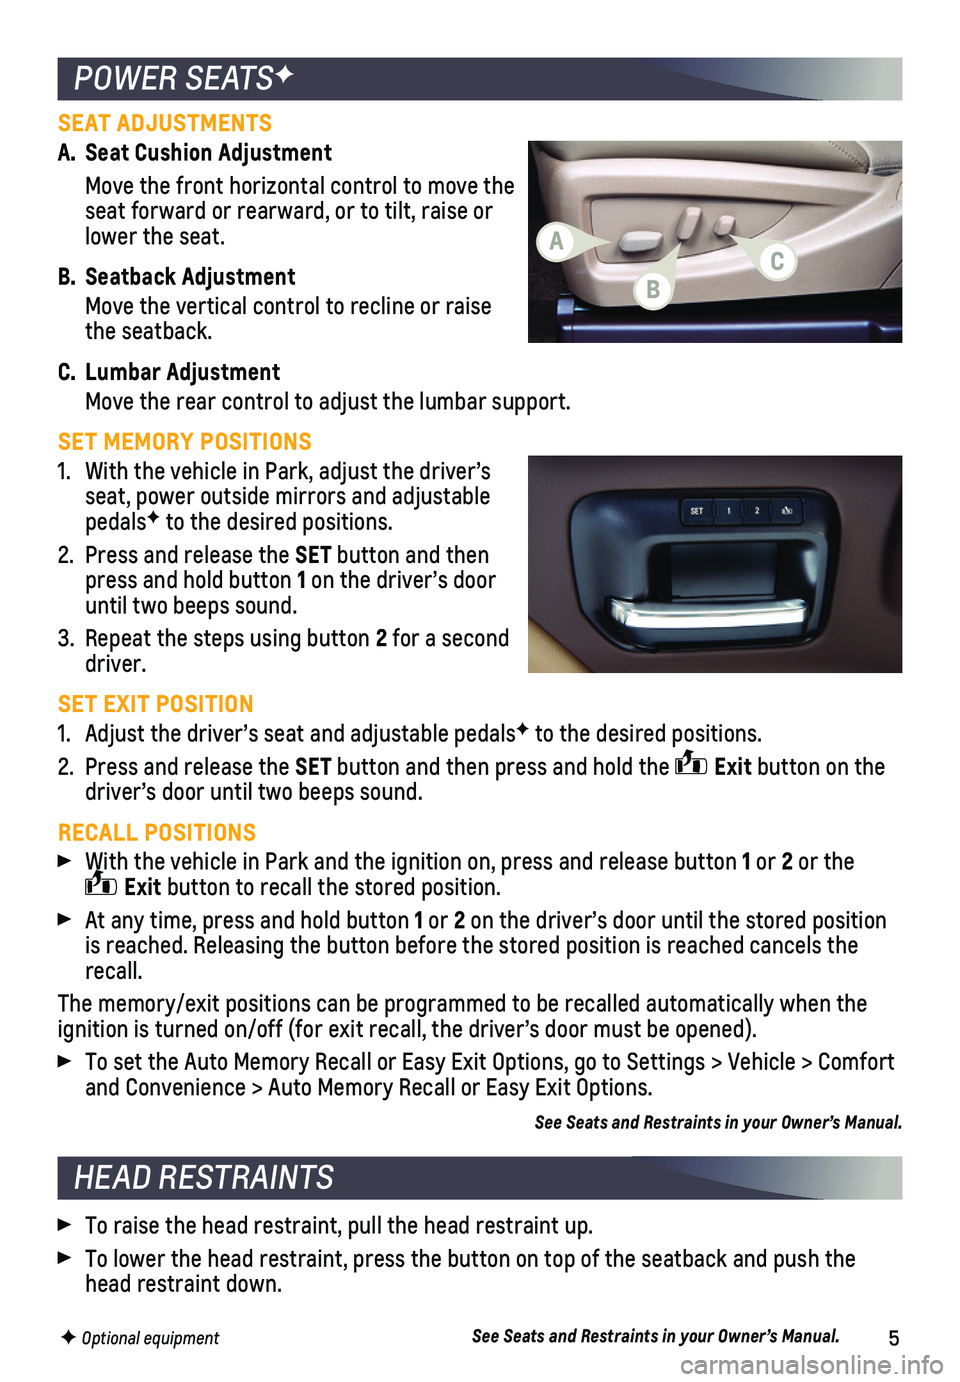 CHEVROLET SILVERADO 2018  Get To Know Guide 5
POWER SEATSF
HEAD RESTRAINTS
SEAT ADJUSTMENTS
A. Seat Cushion Adjustment
 Move the front horizontal control to move the seat forward or rearward, or to tilt, raise or lower the seat.
B. Seatback Adj